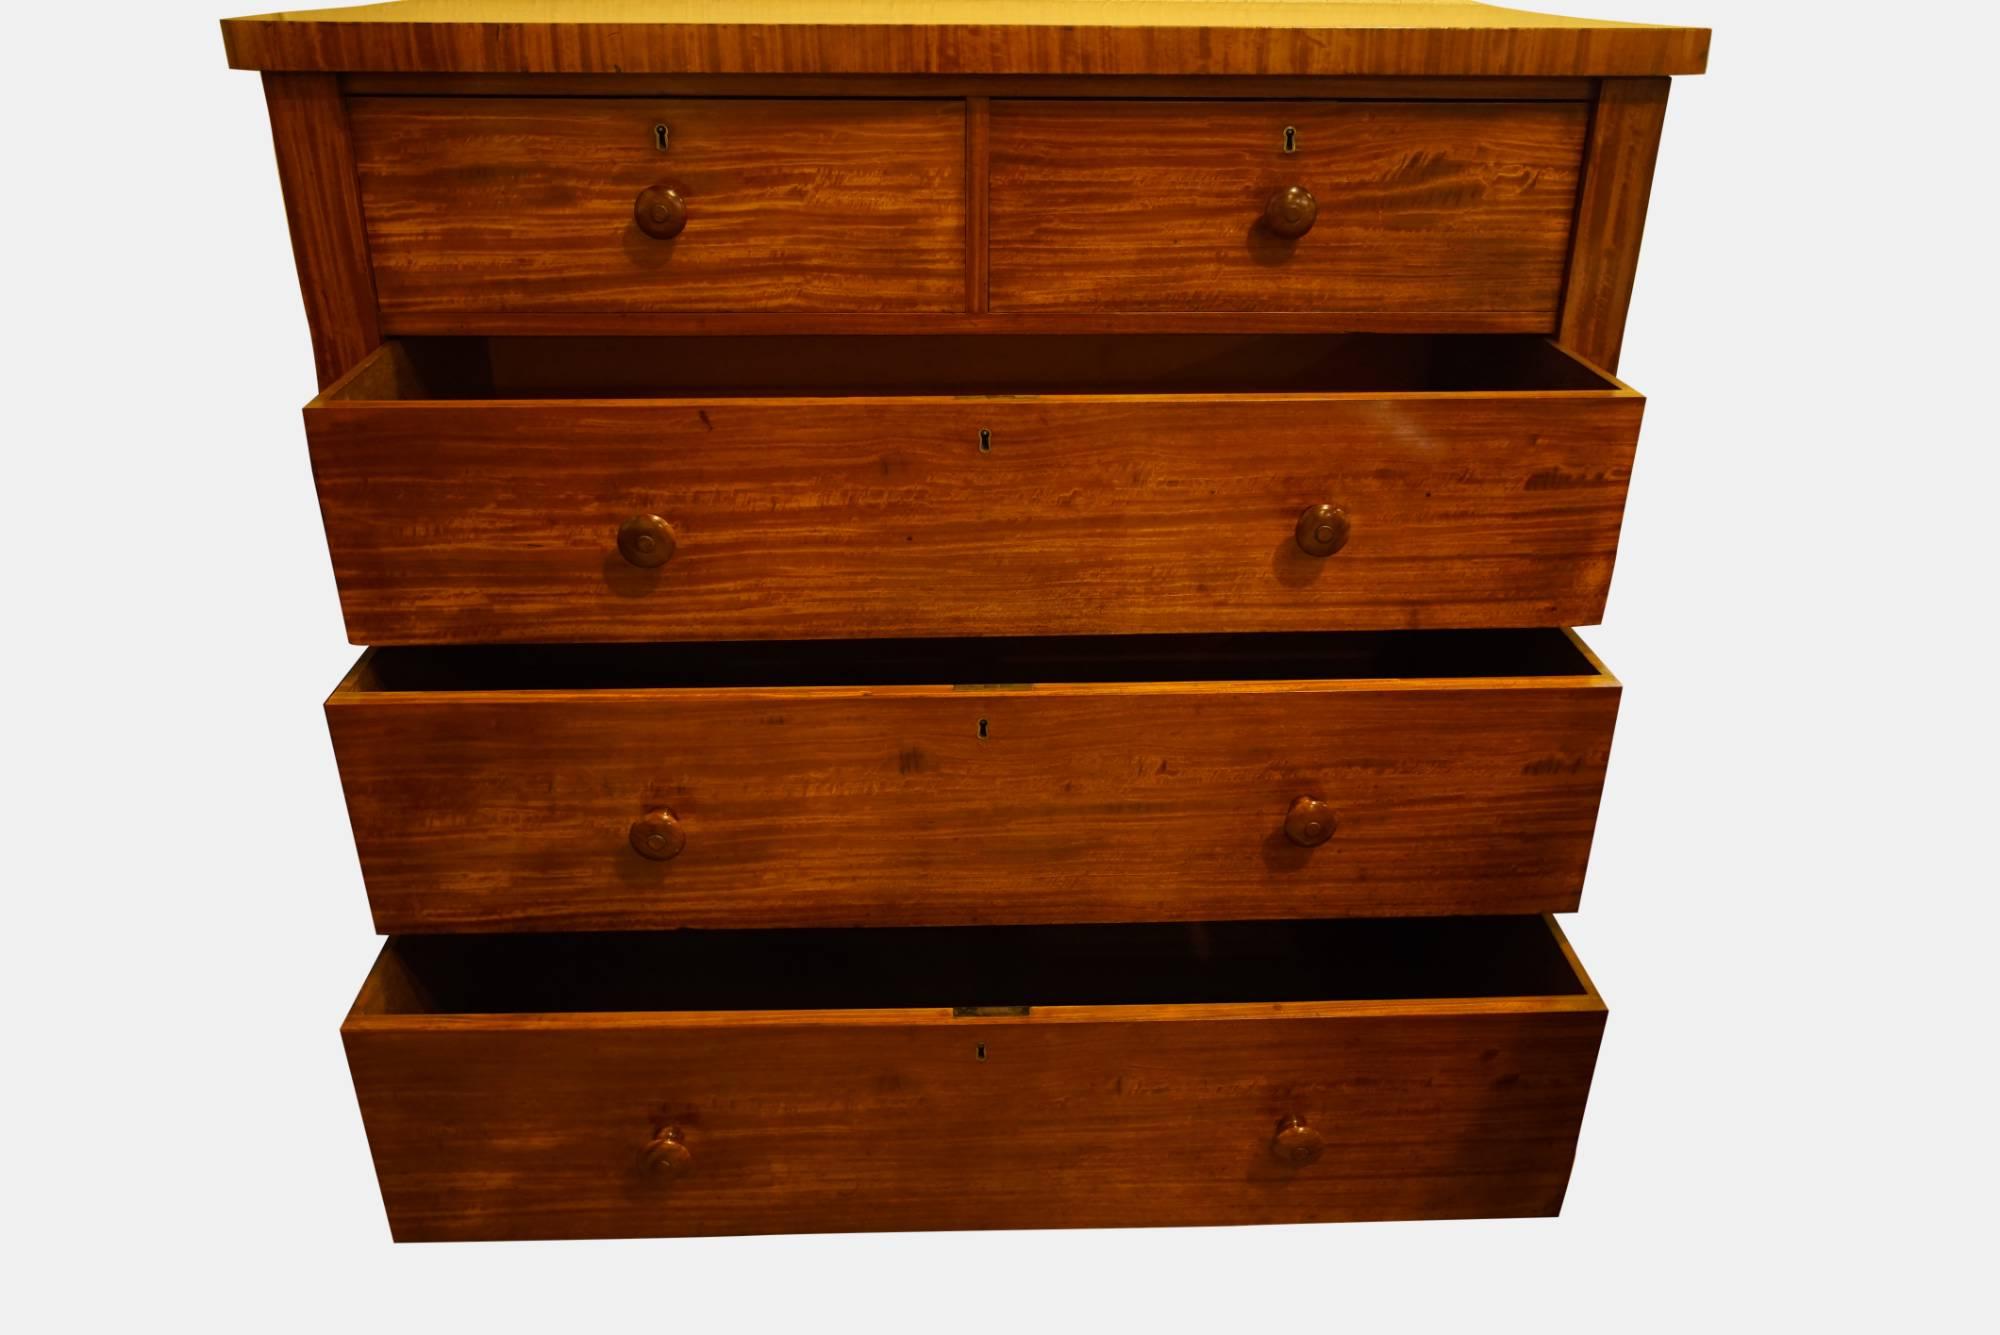 An exceptional quality early 19th century satinwood chest in original condition,

circa 1830.
 